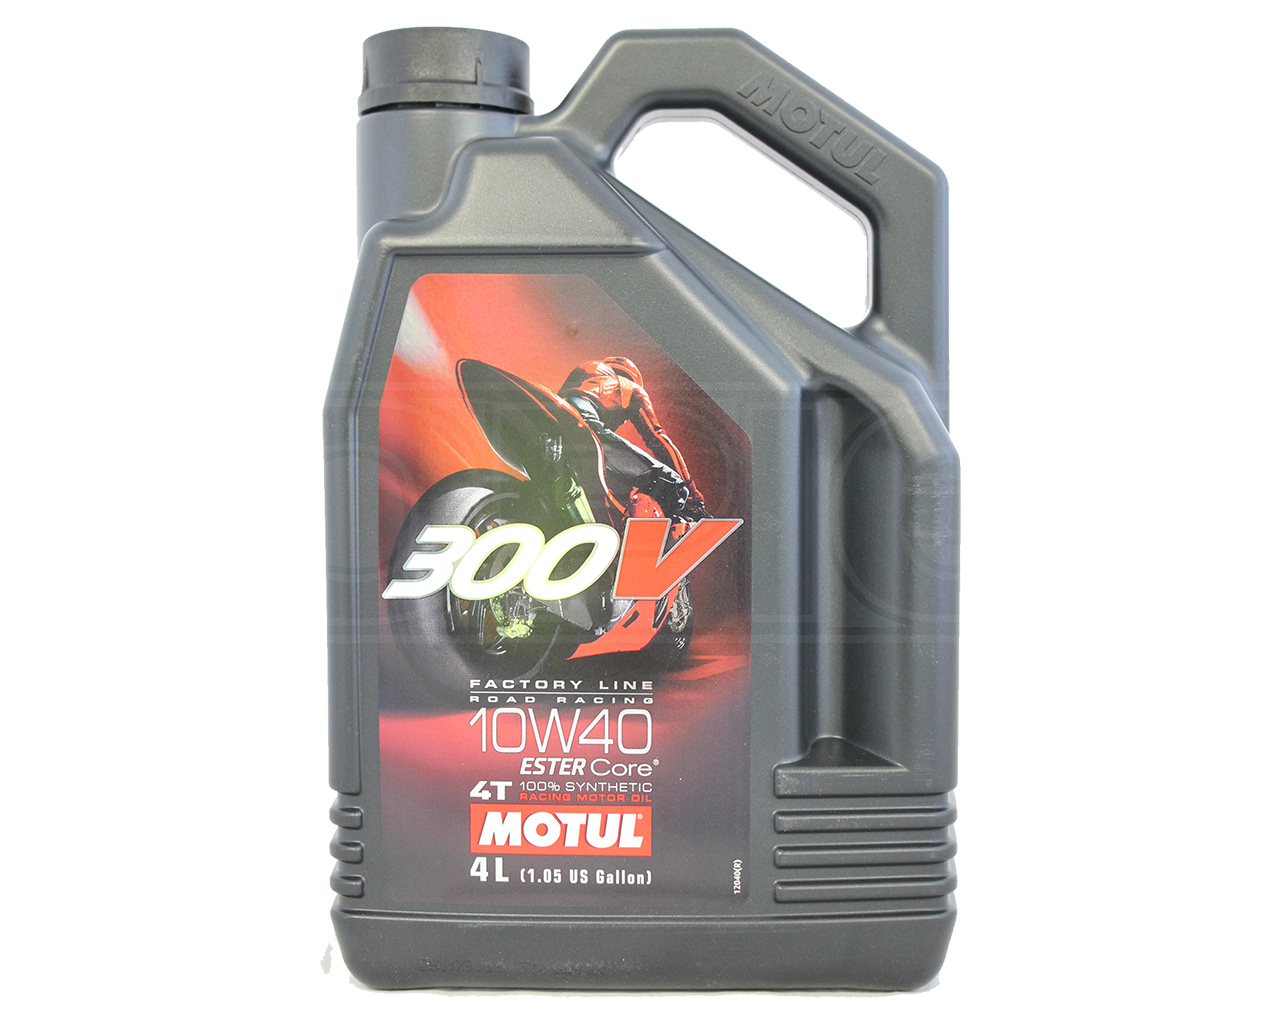 Motul 300v 10w40 Factory Line 20 Litre, FREE UK DELIVERY, Flexible Ways  To Pay